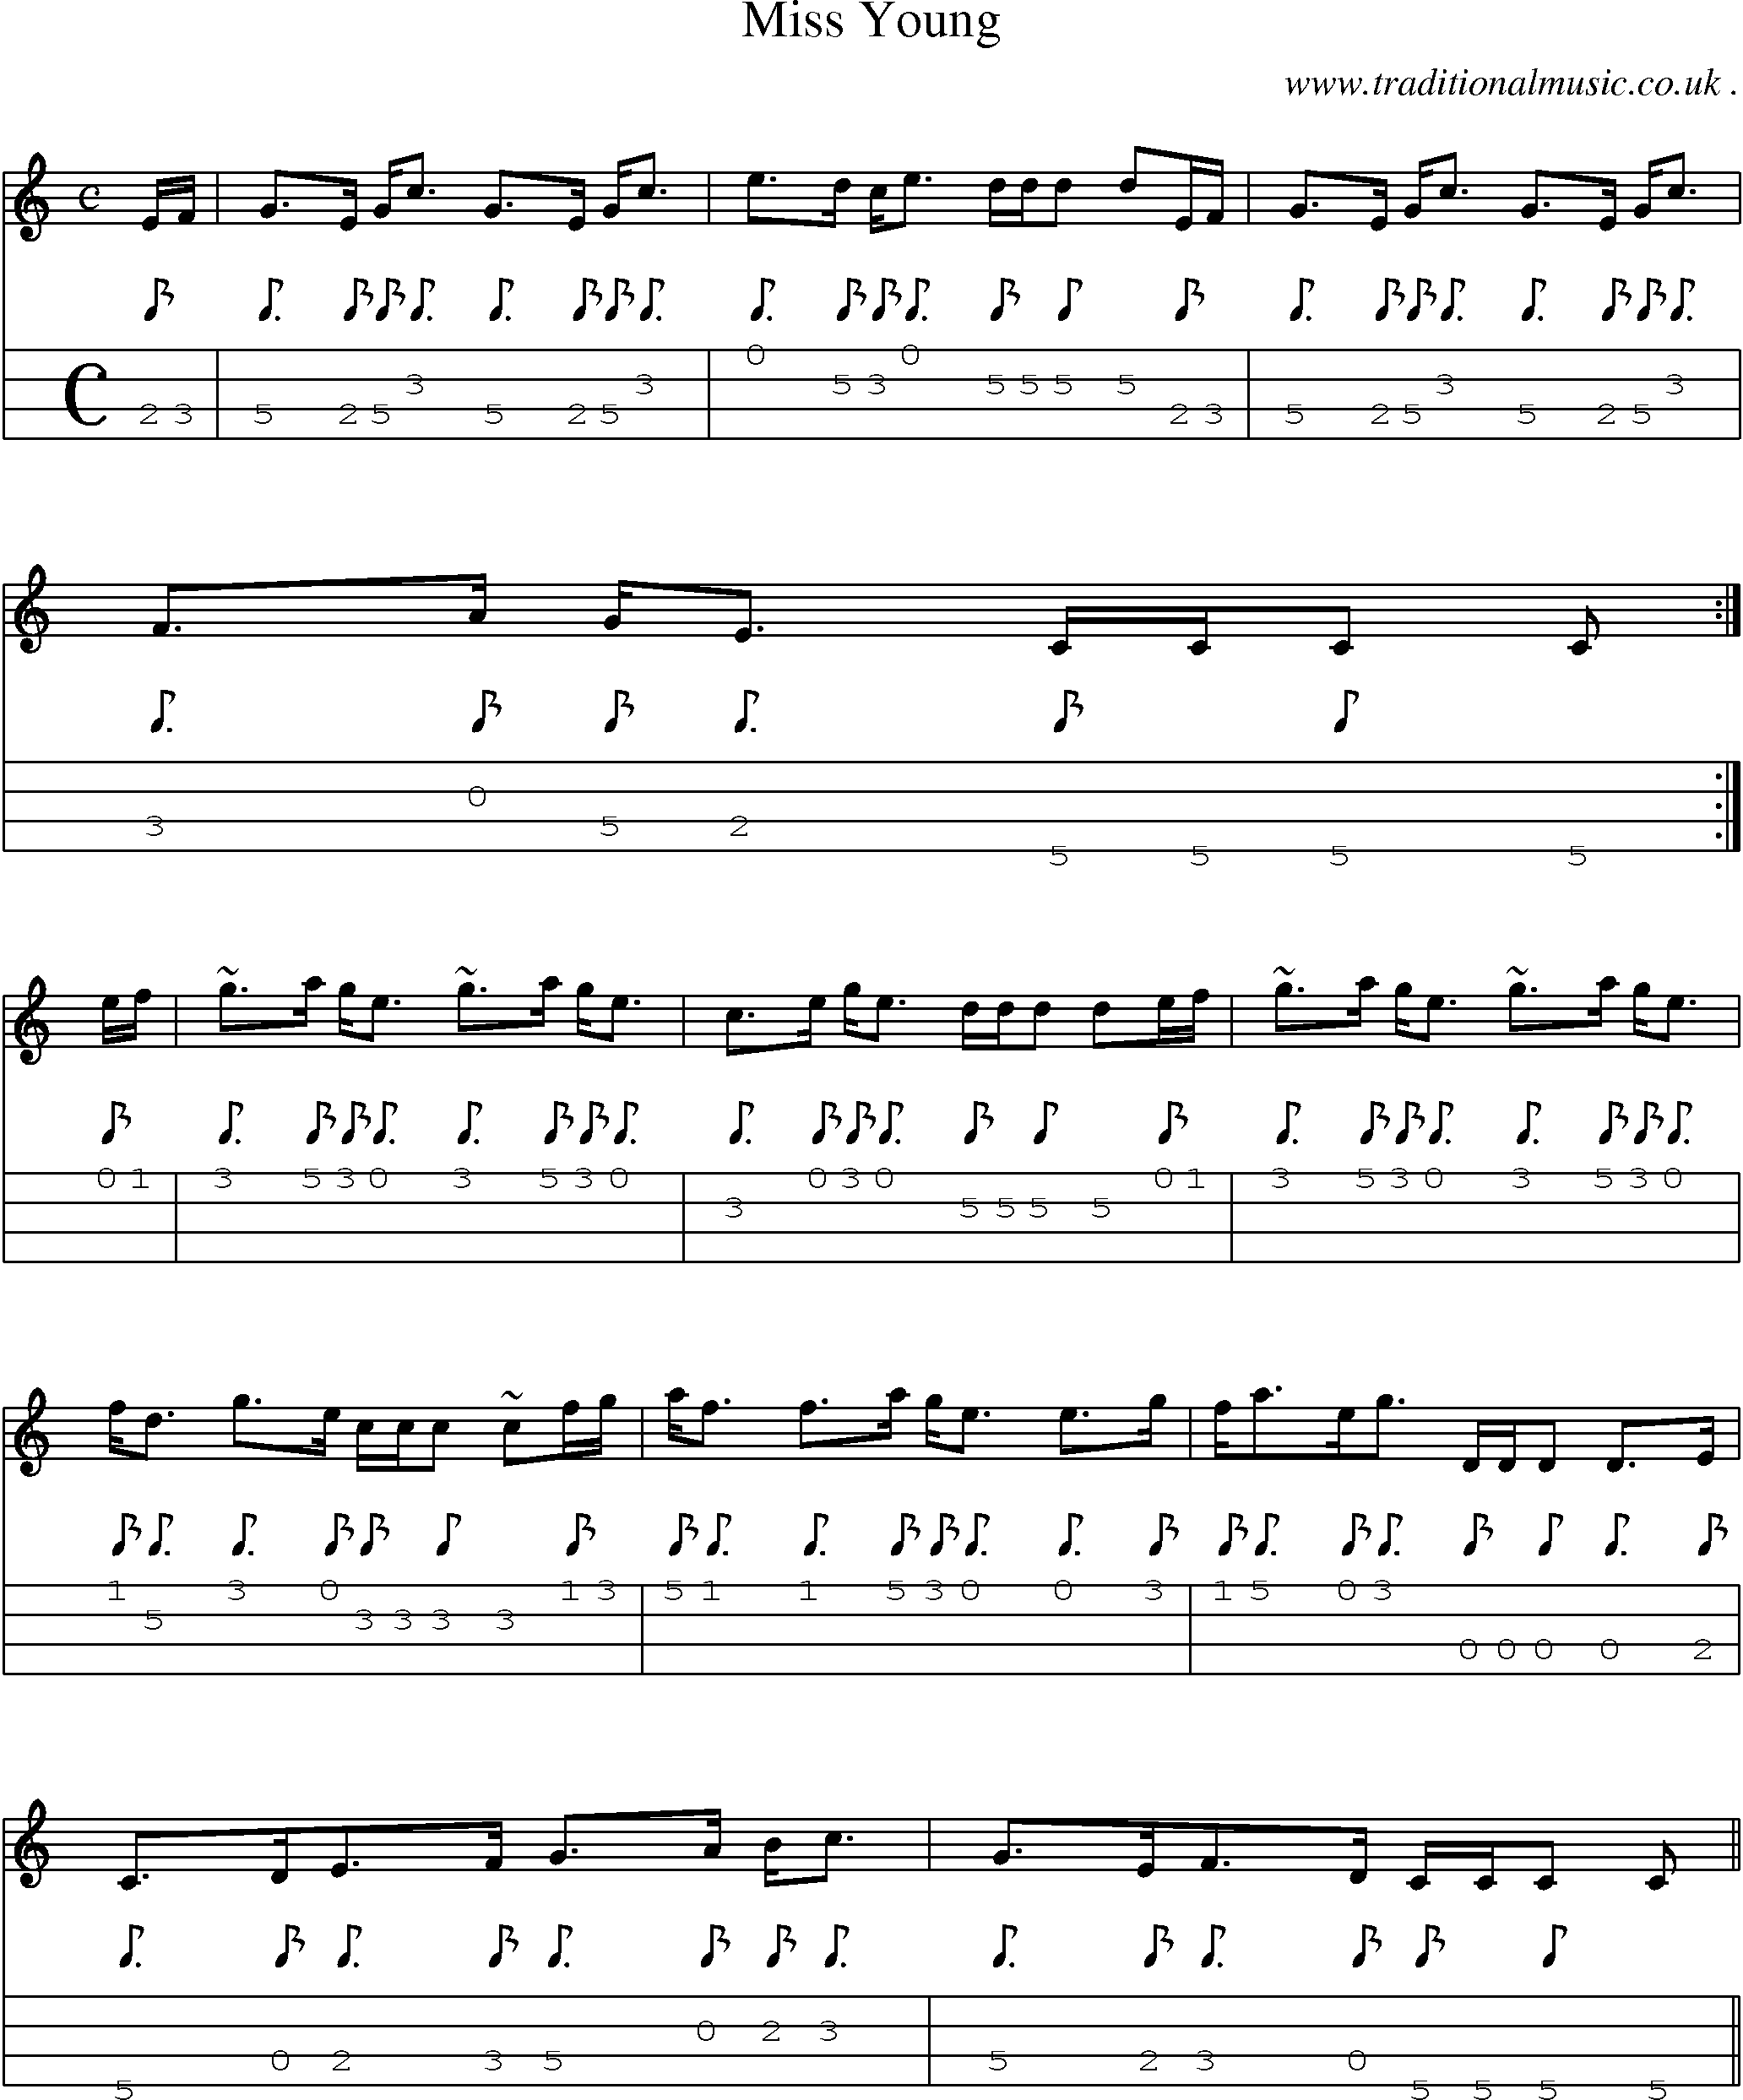 Sheet-music  score, Chords and Mandolin Tabs for Miss Young